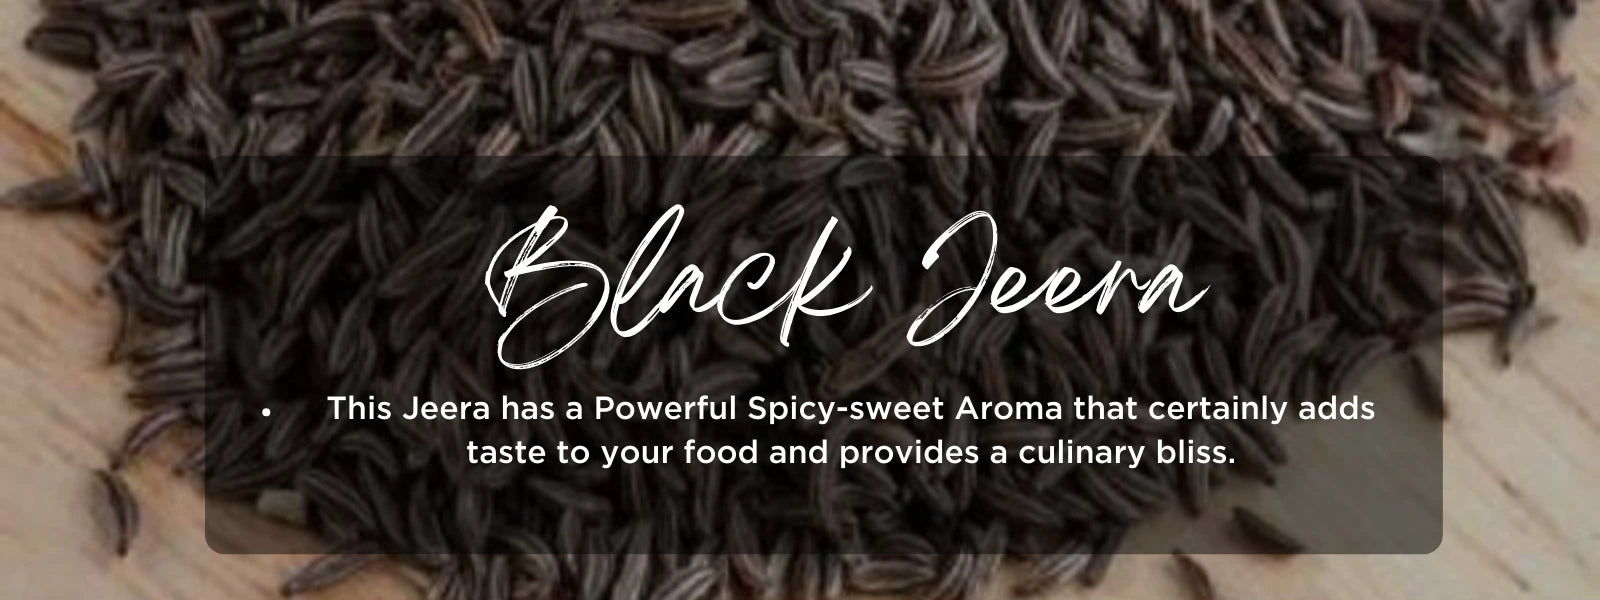 Black jeera - Health Benefits, Uses and Important Facts